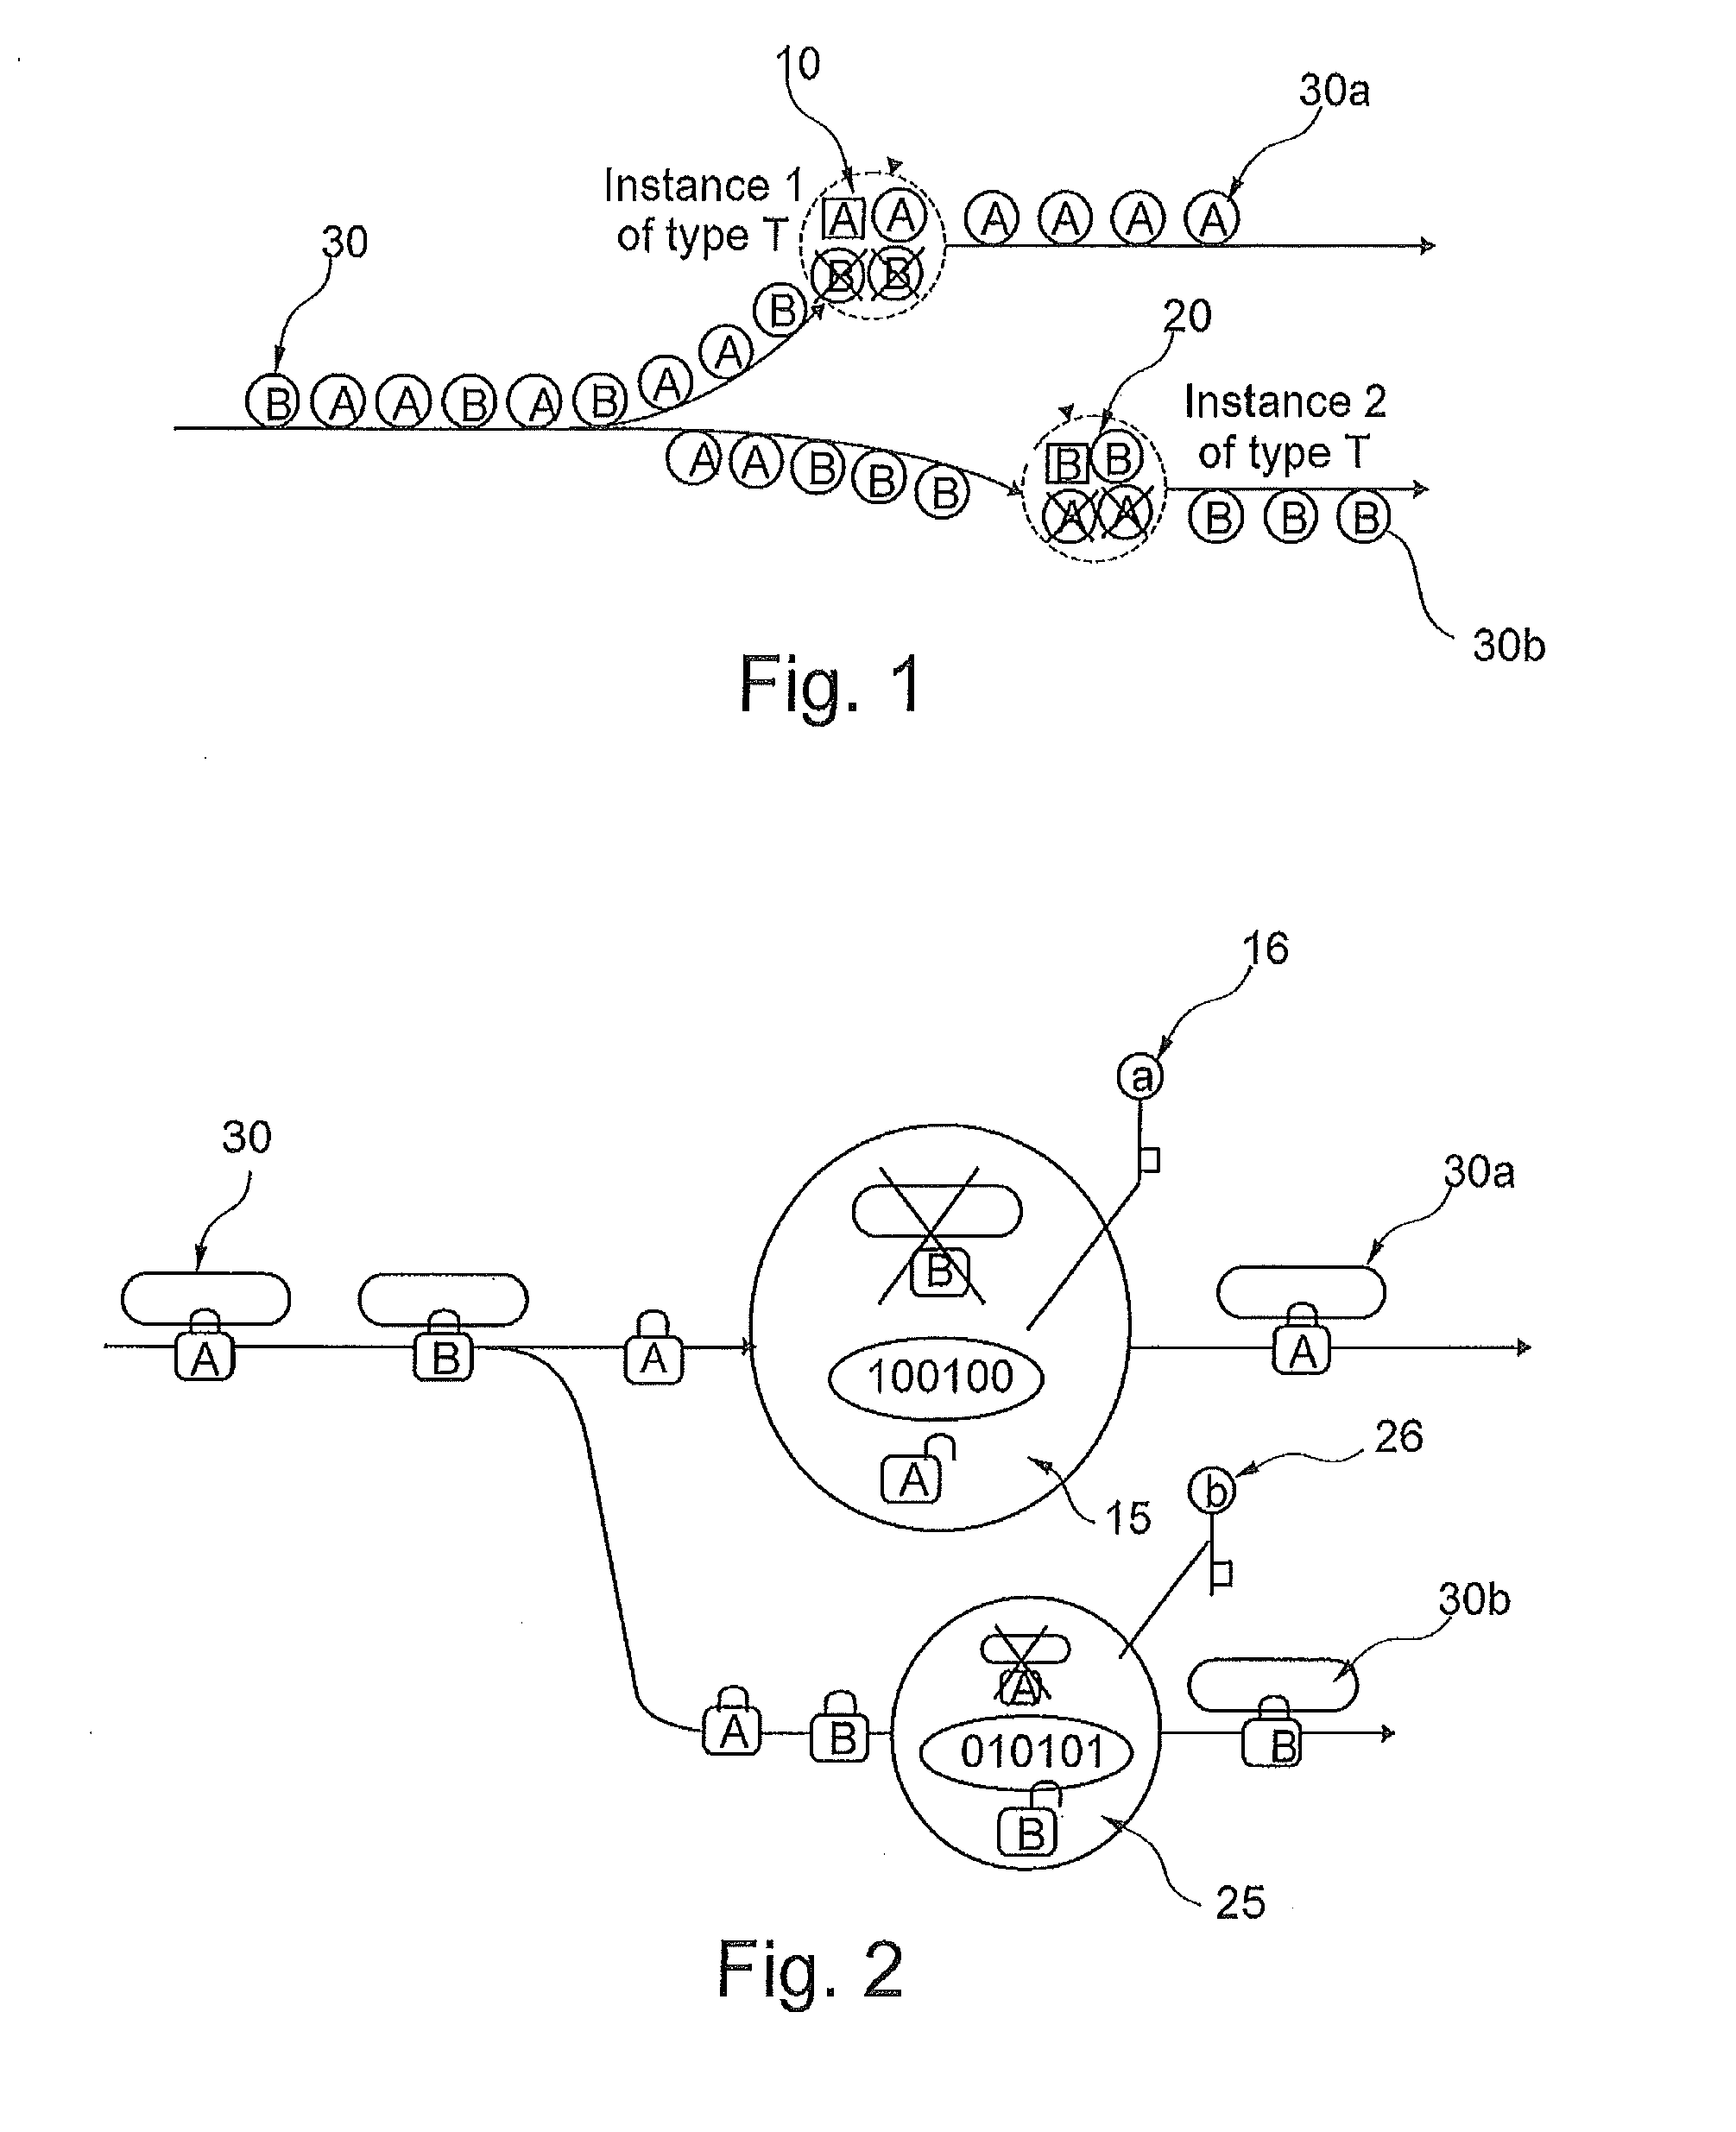 Method for processing data streams with multiple tenants